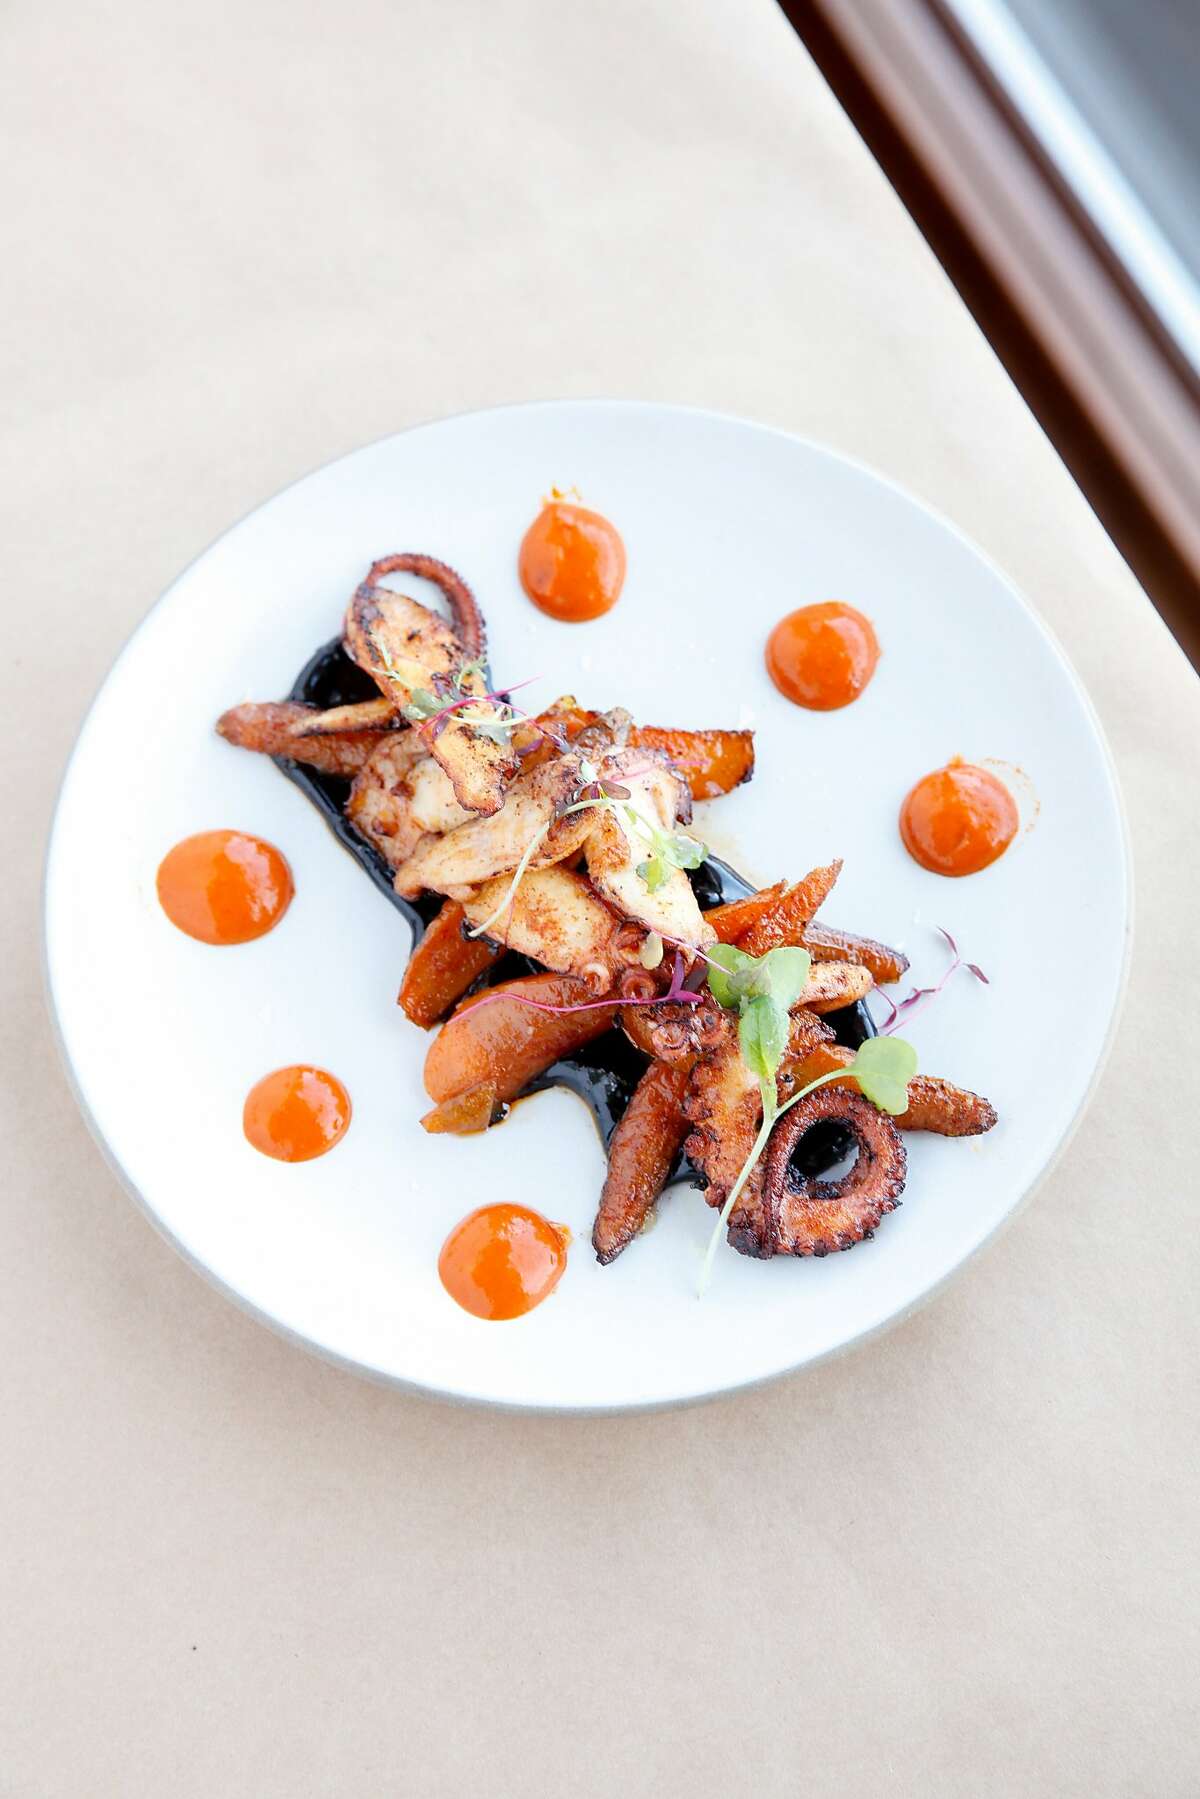 The seared octopus with roasted baby carrots, mojo picon and a black garlic aioli at Zuzu in Napa, Calif., on Thursday, October 15, 2015.